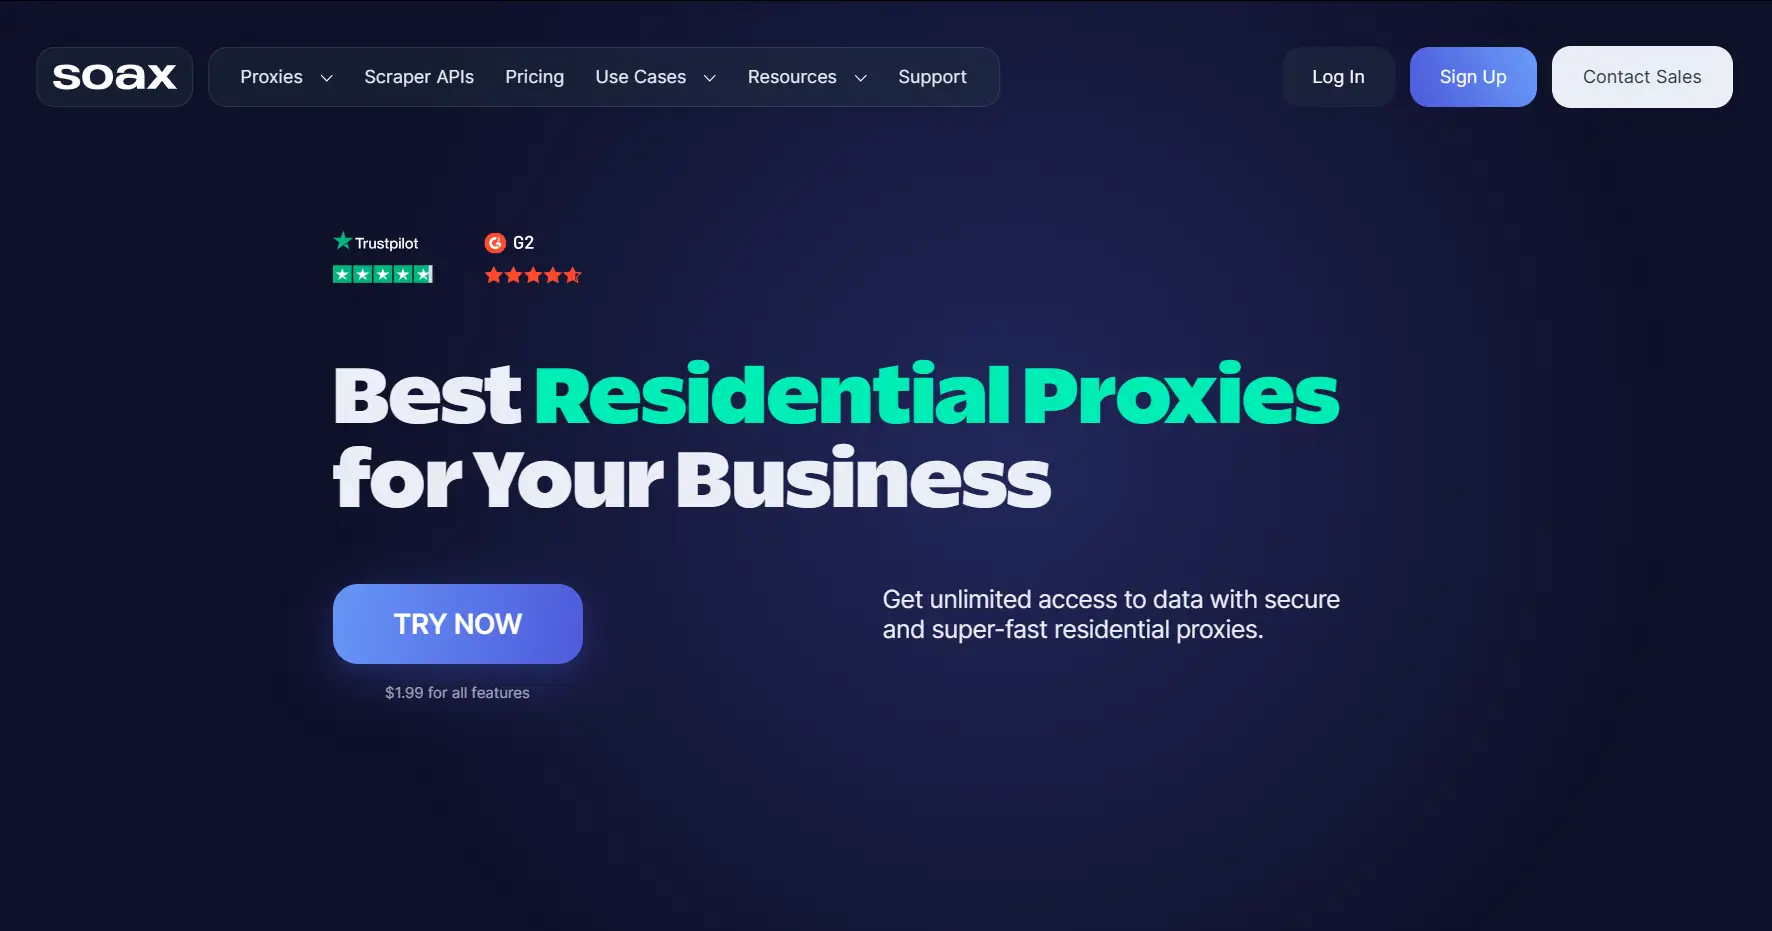 best residential proxies - SOAX